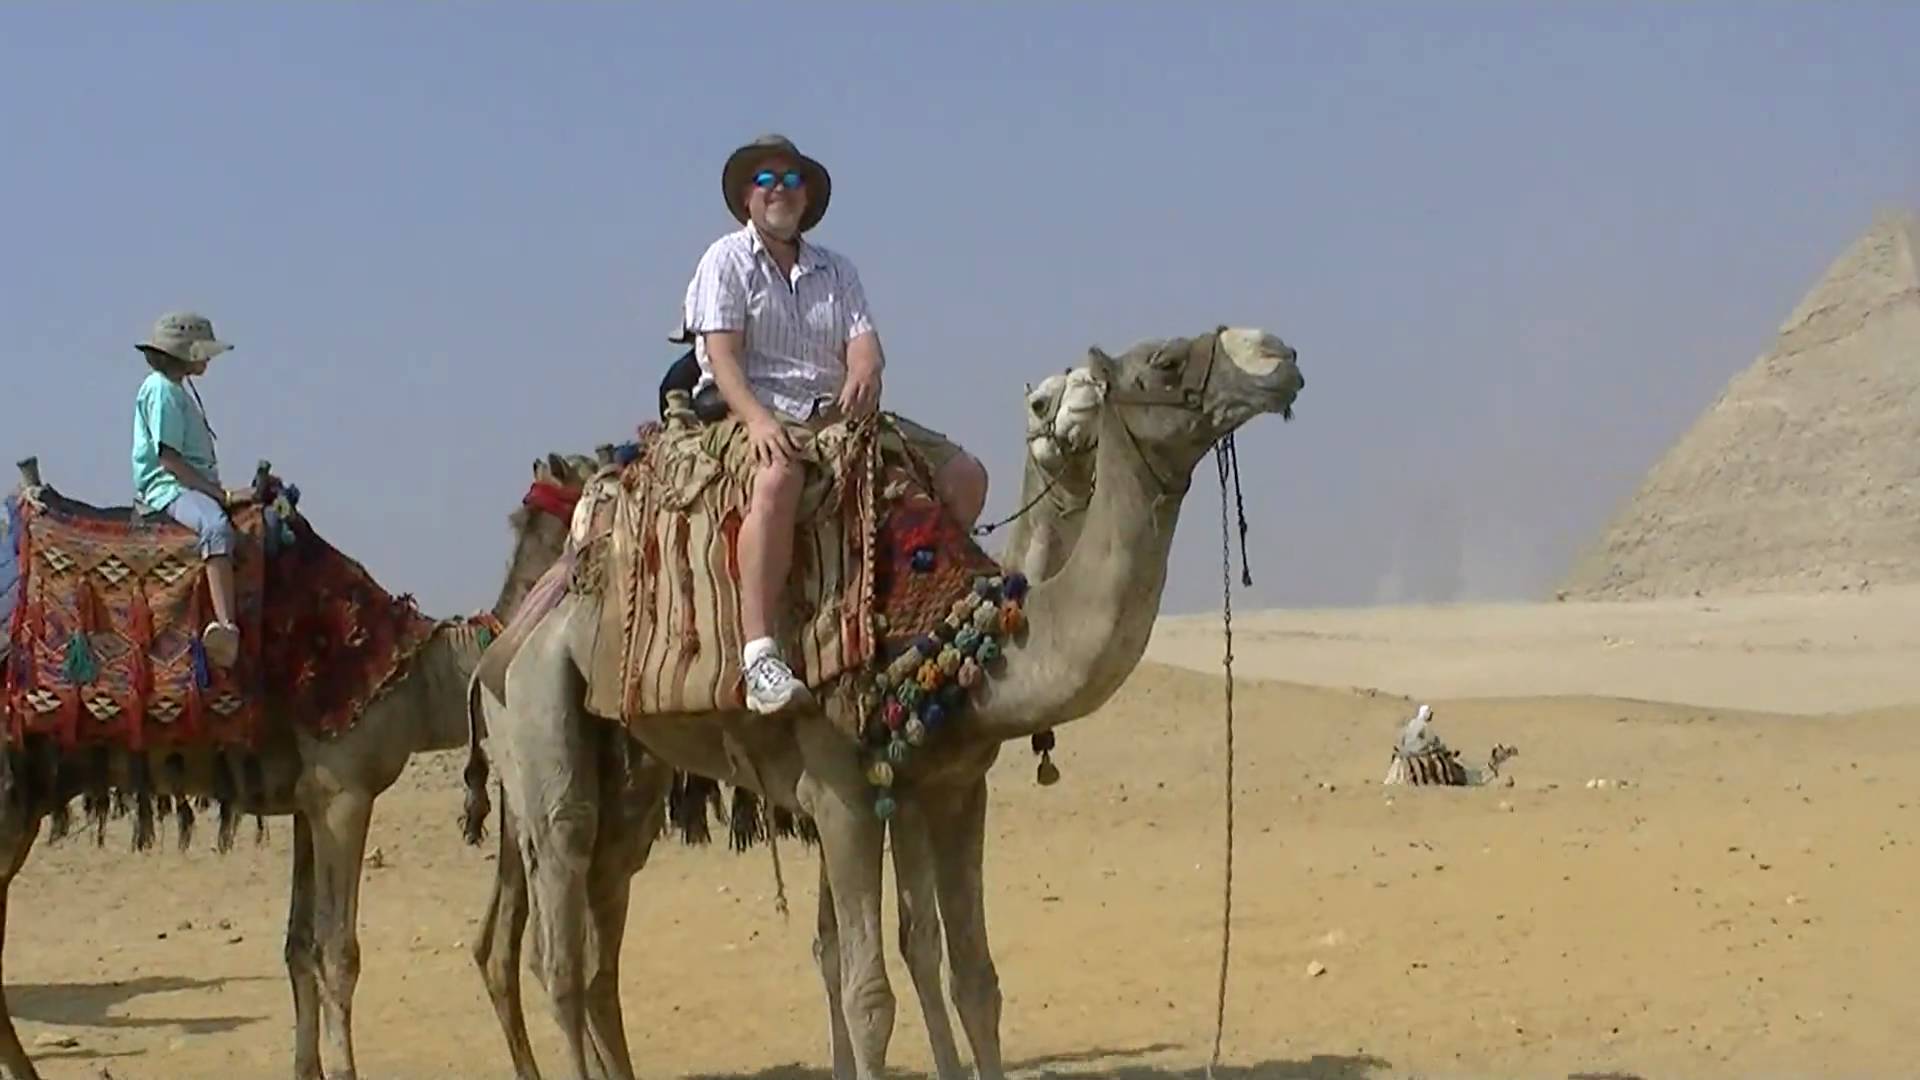 camel pic of me from boy - YouTube